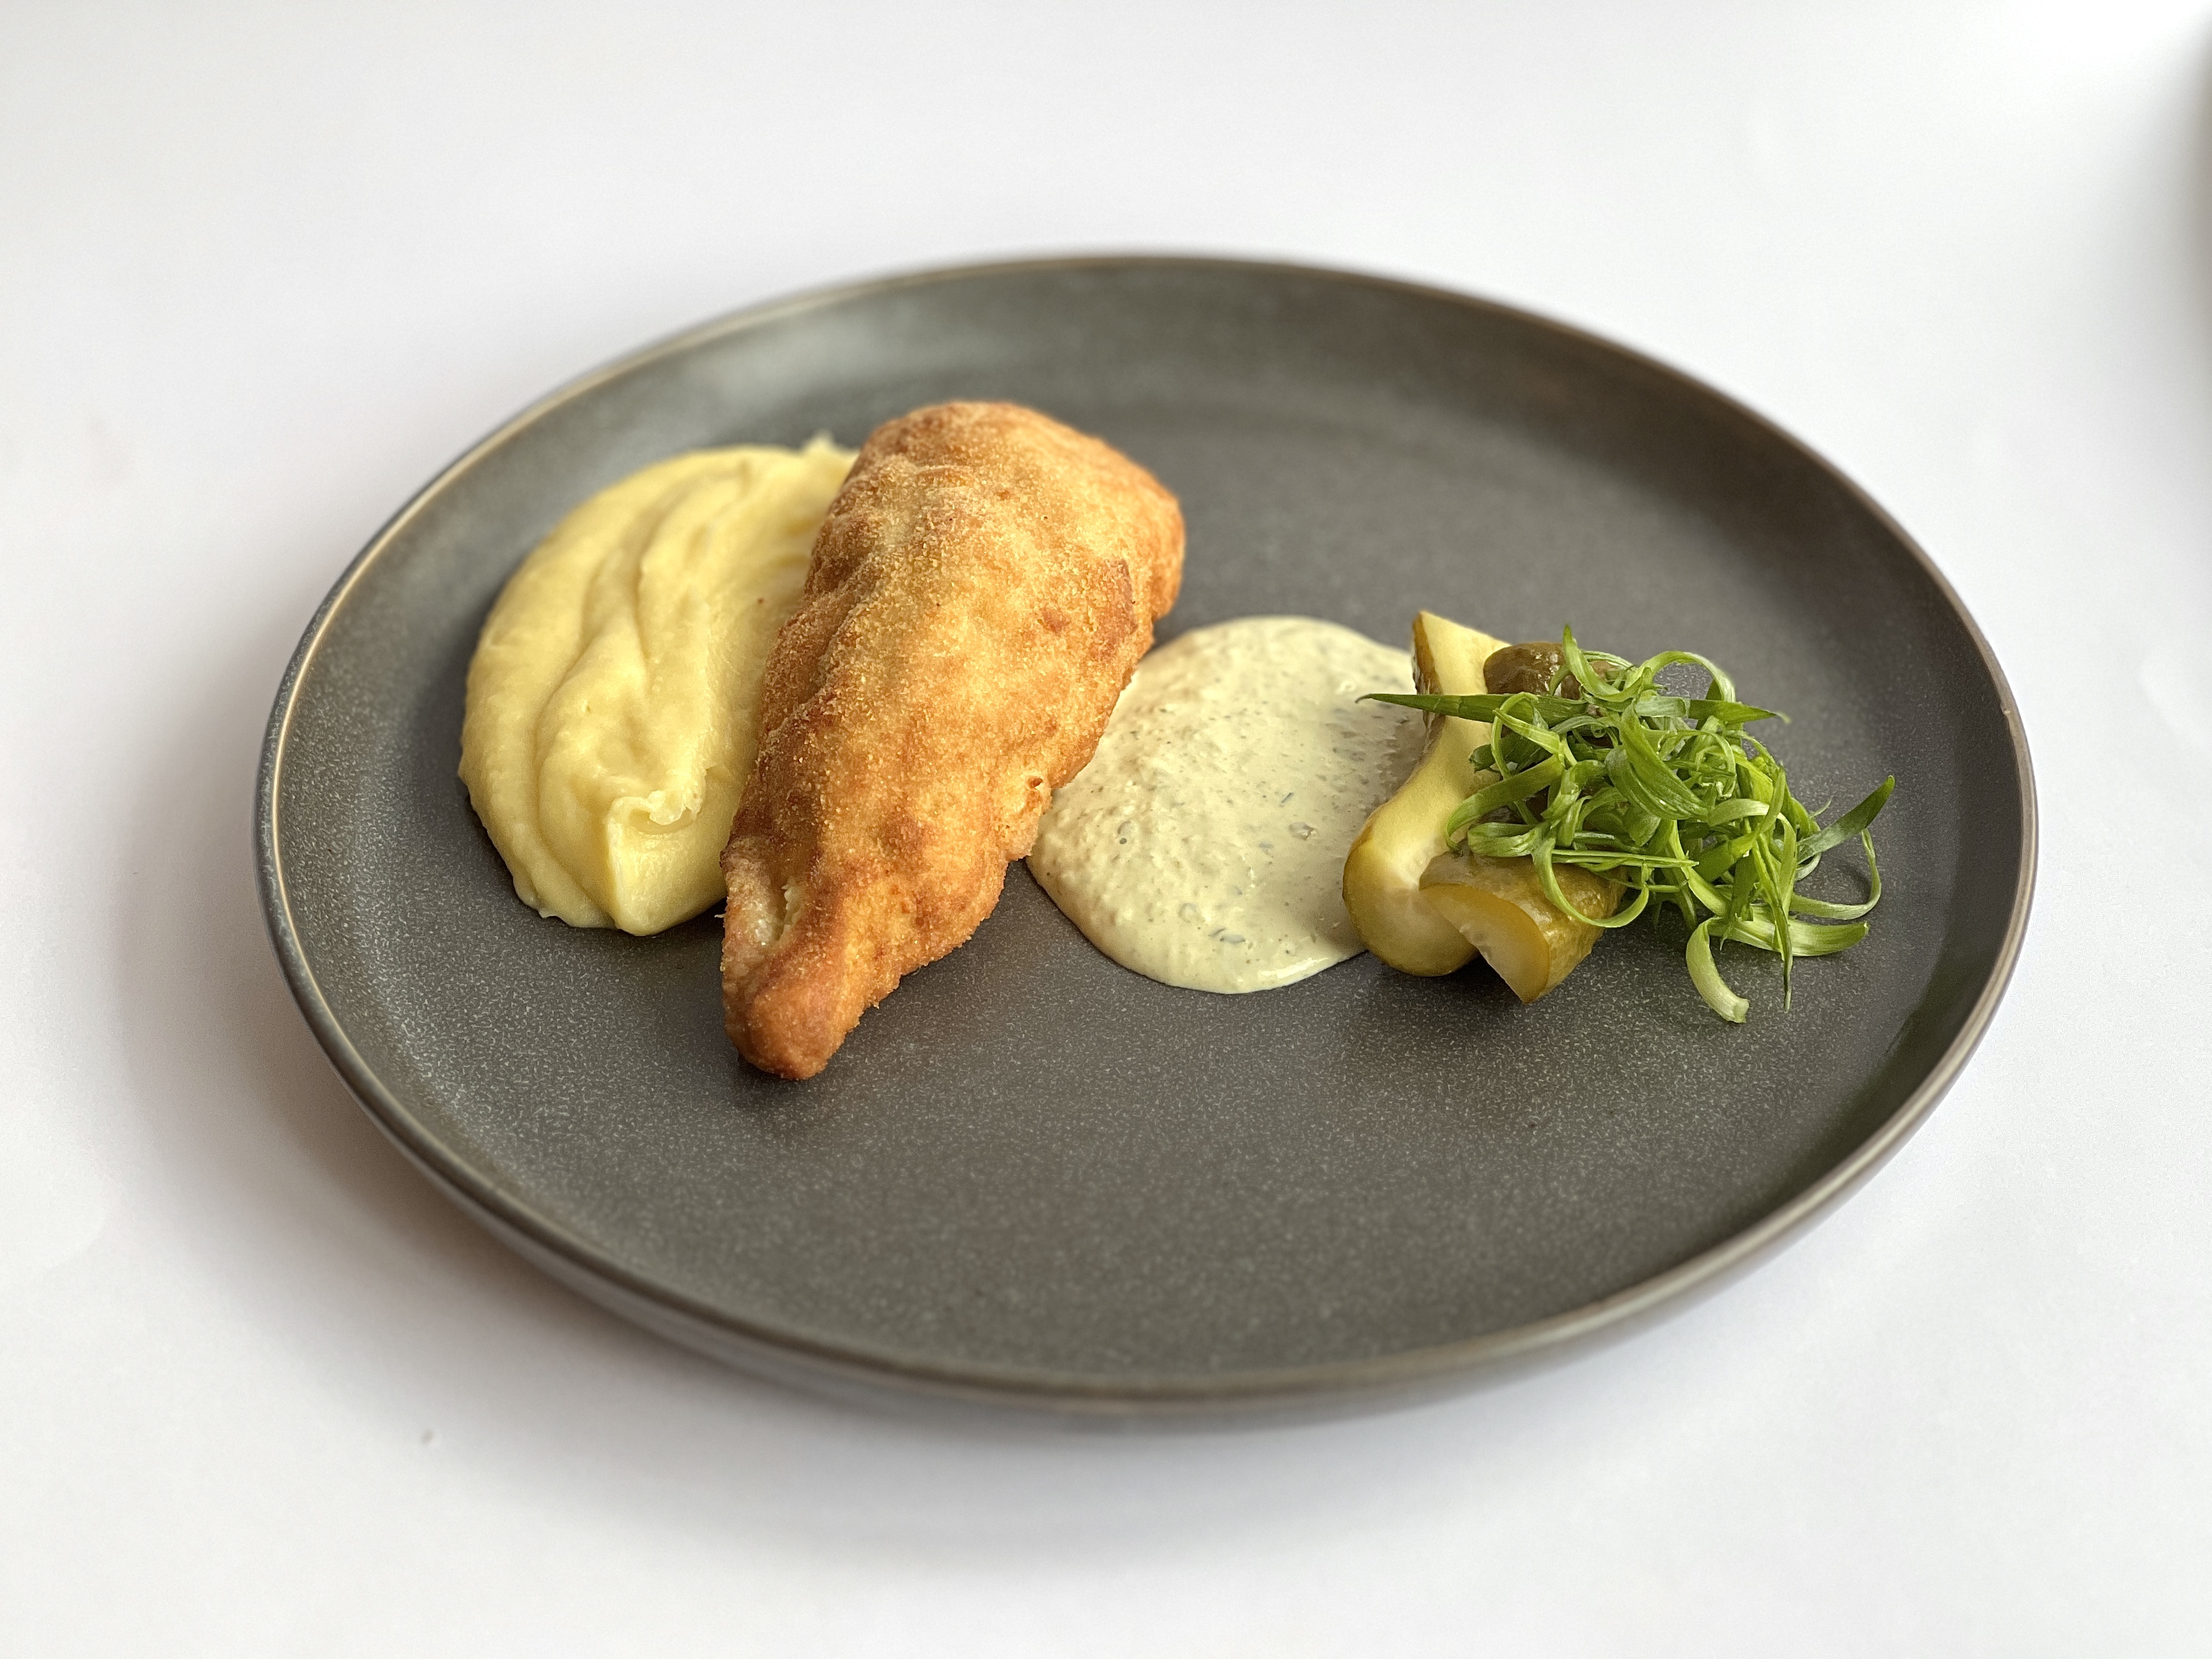 Kiev cutlet, mashed potatoes with remoulade sauce <br>